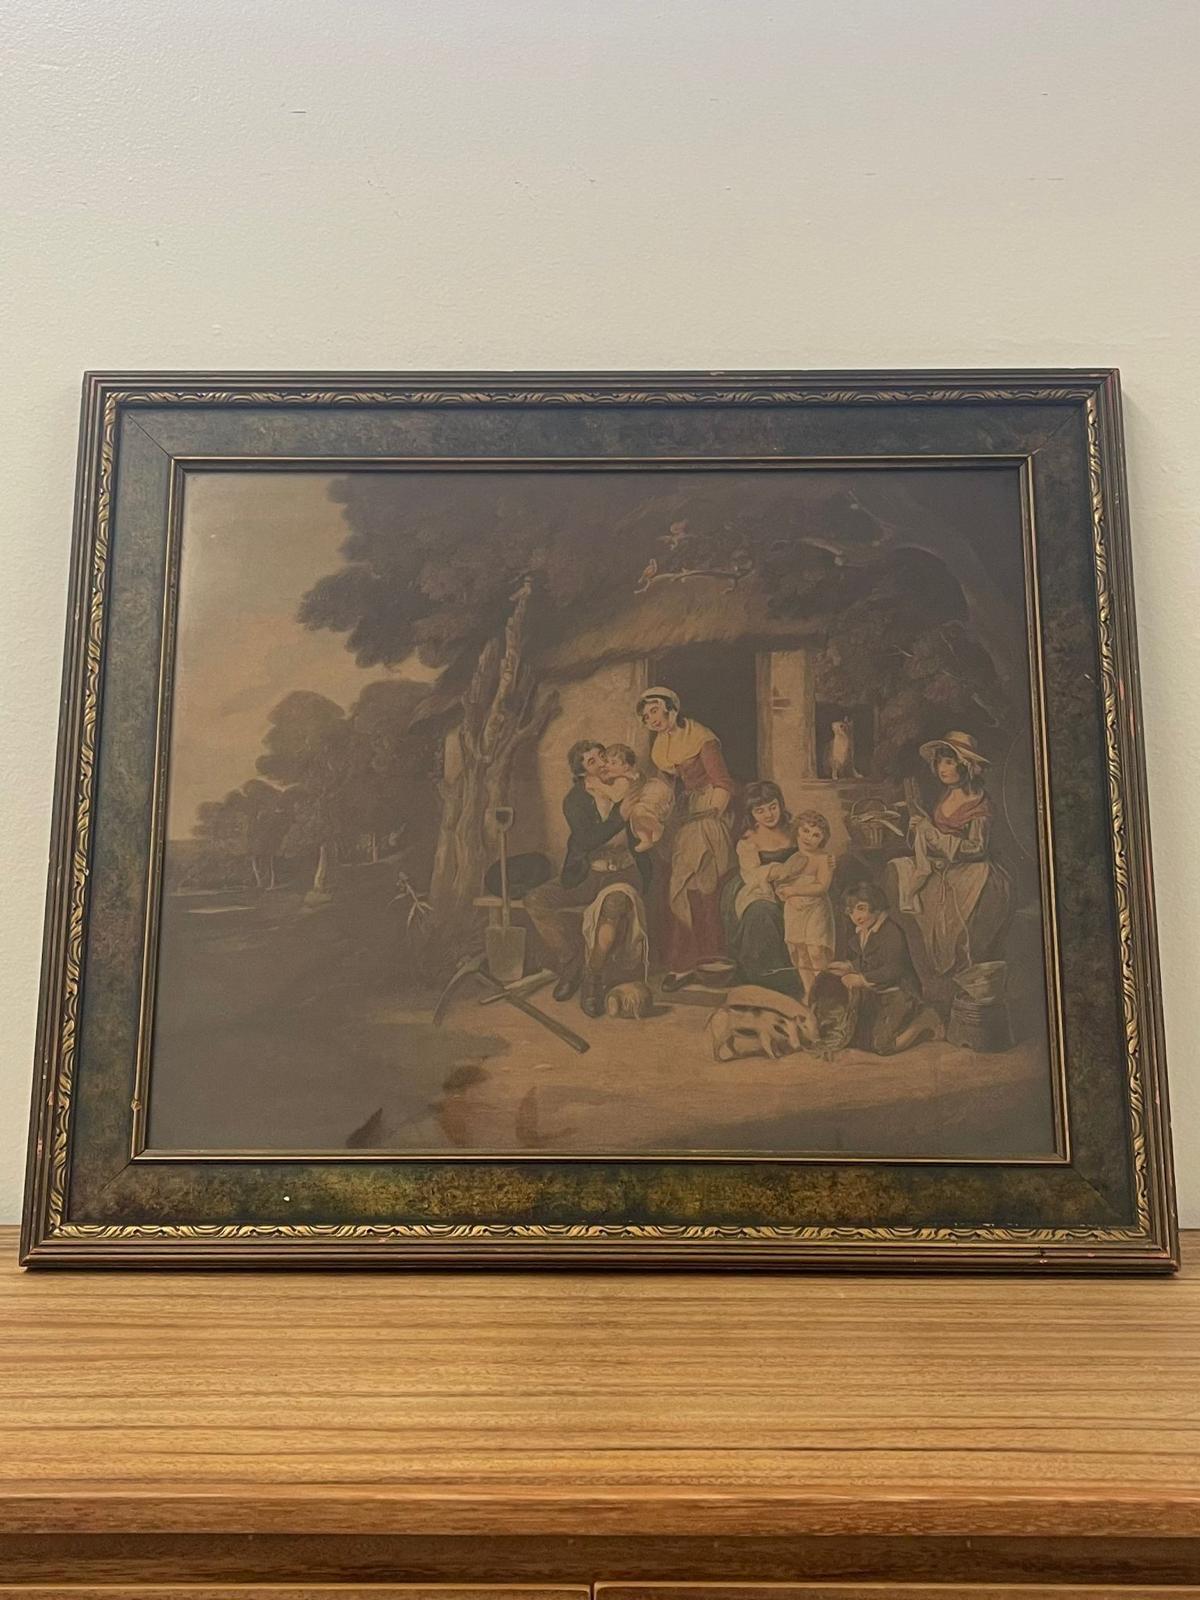 Print on Paper within a Vintage Detailed Frame. Frame Has Board Backing with a Small Description of the Print. Vintage Condition Consistent with Age as Pictured.

Dimensions. 25 W ; 0.50 D ; 21 H